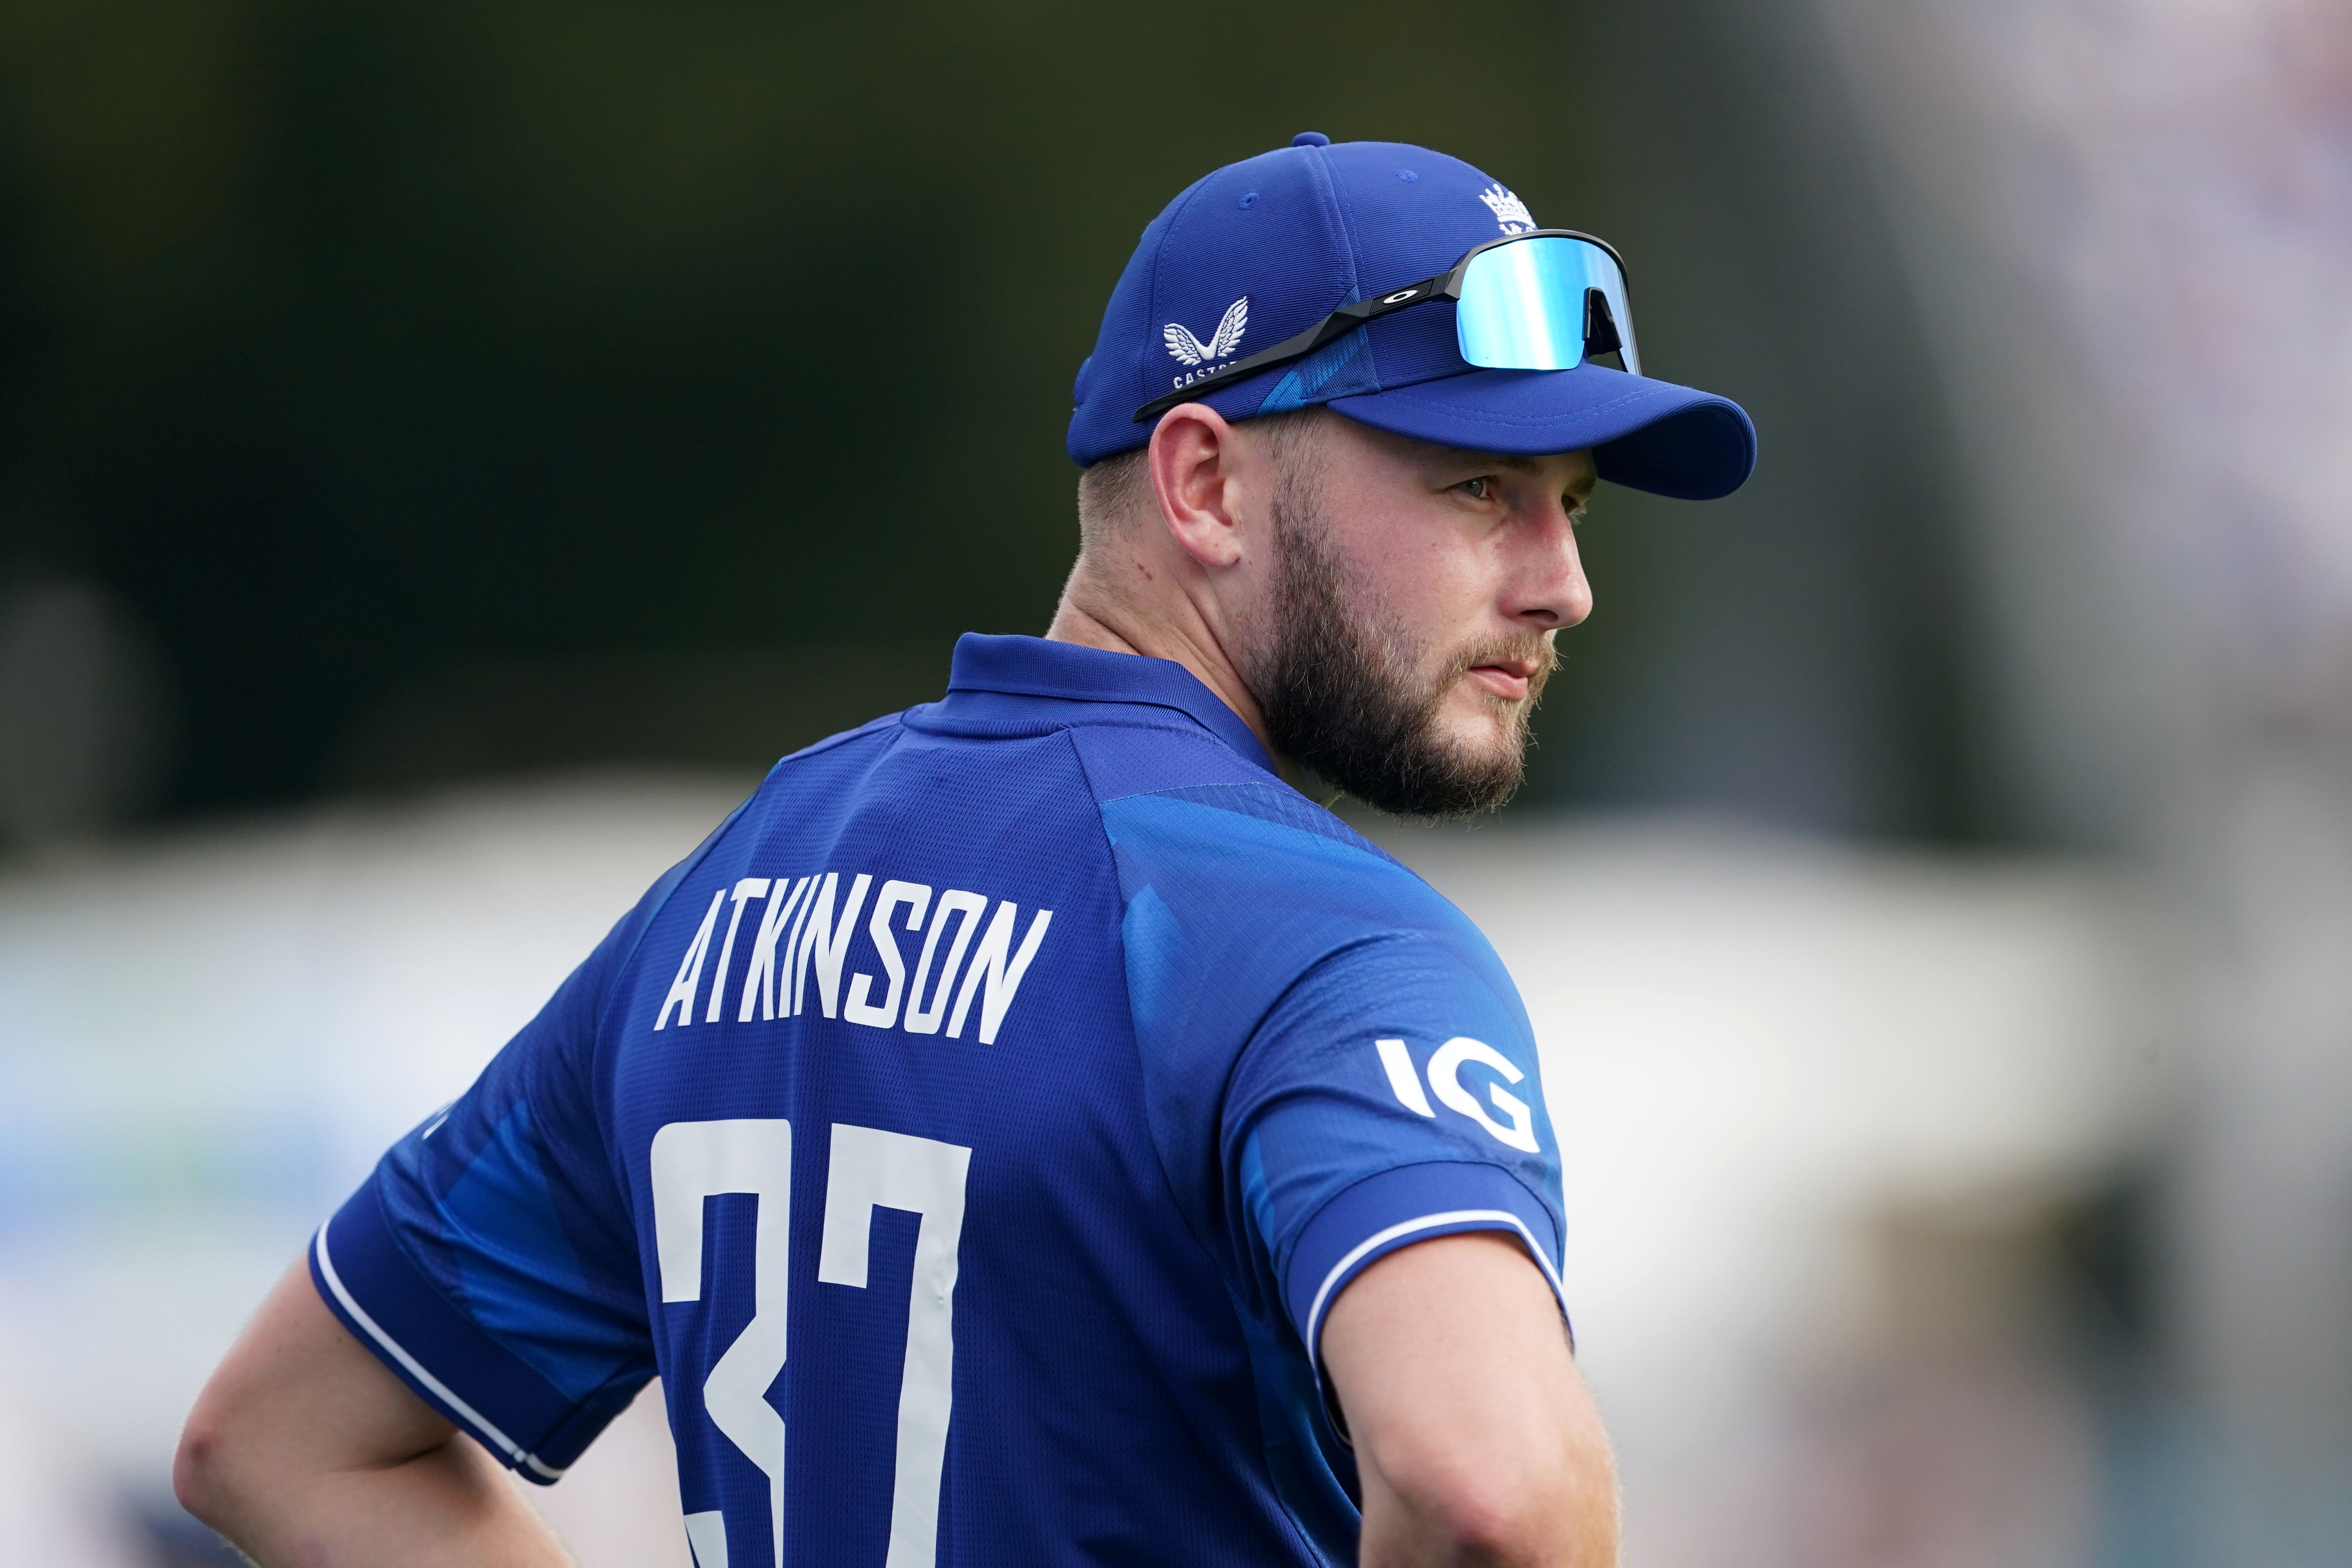 Gus Atkinson would love to make his Test debut for England this summer (Joe Giddens/PA)